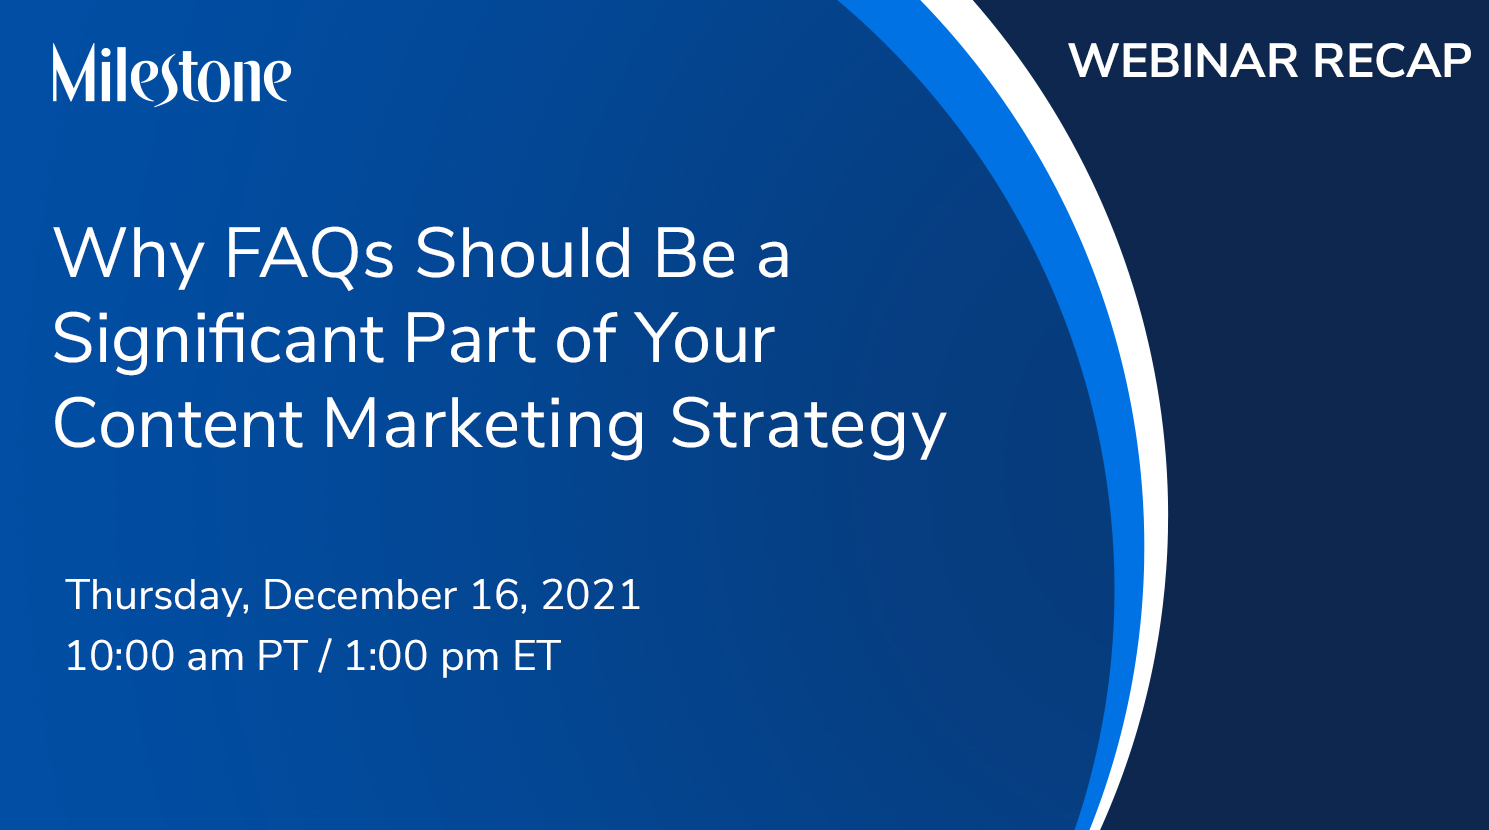 Milestone Webinar Recap: Why FAQs Should Be a Significant Part of Your Content Marketing Strategy